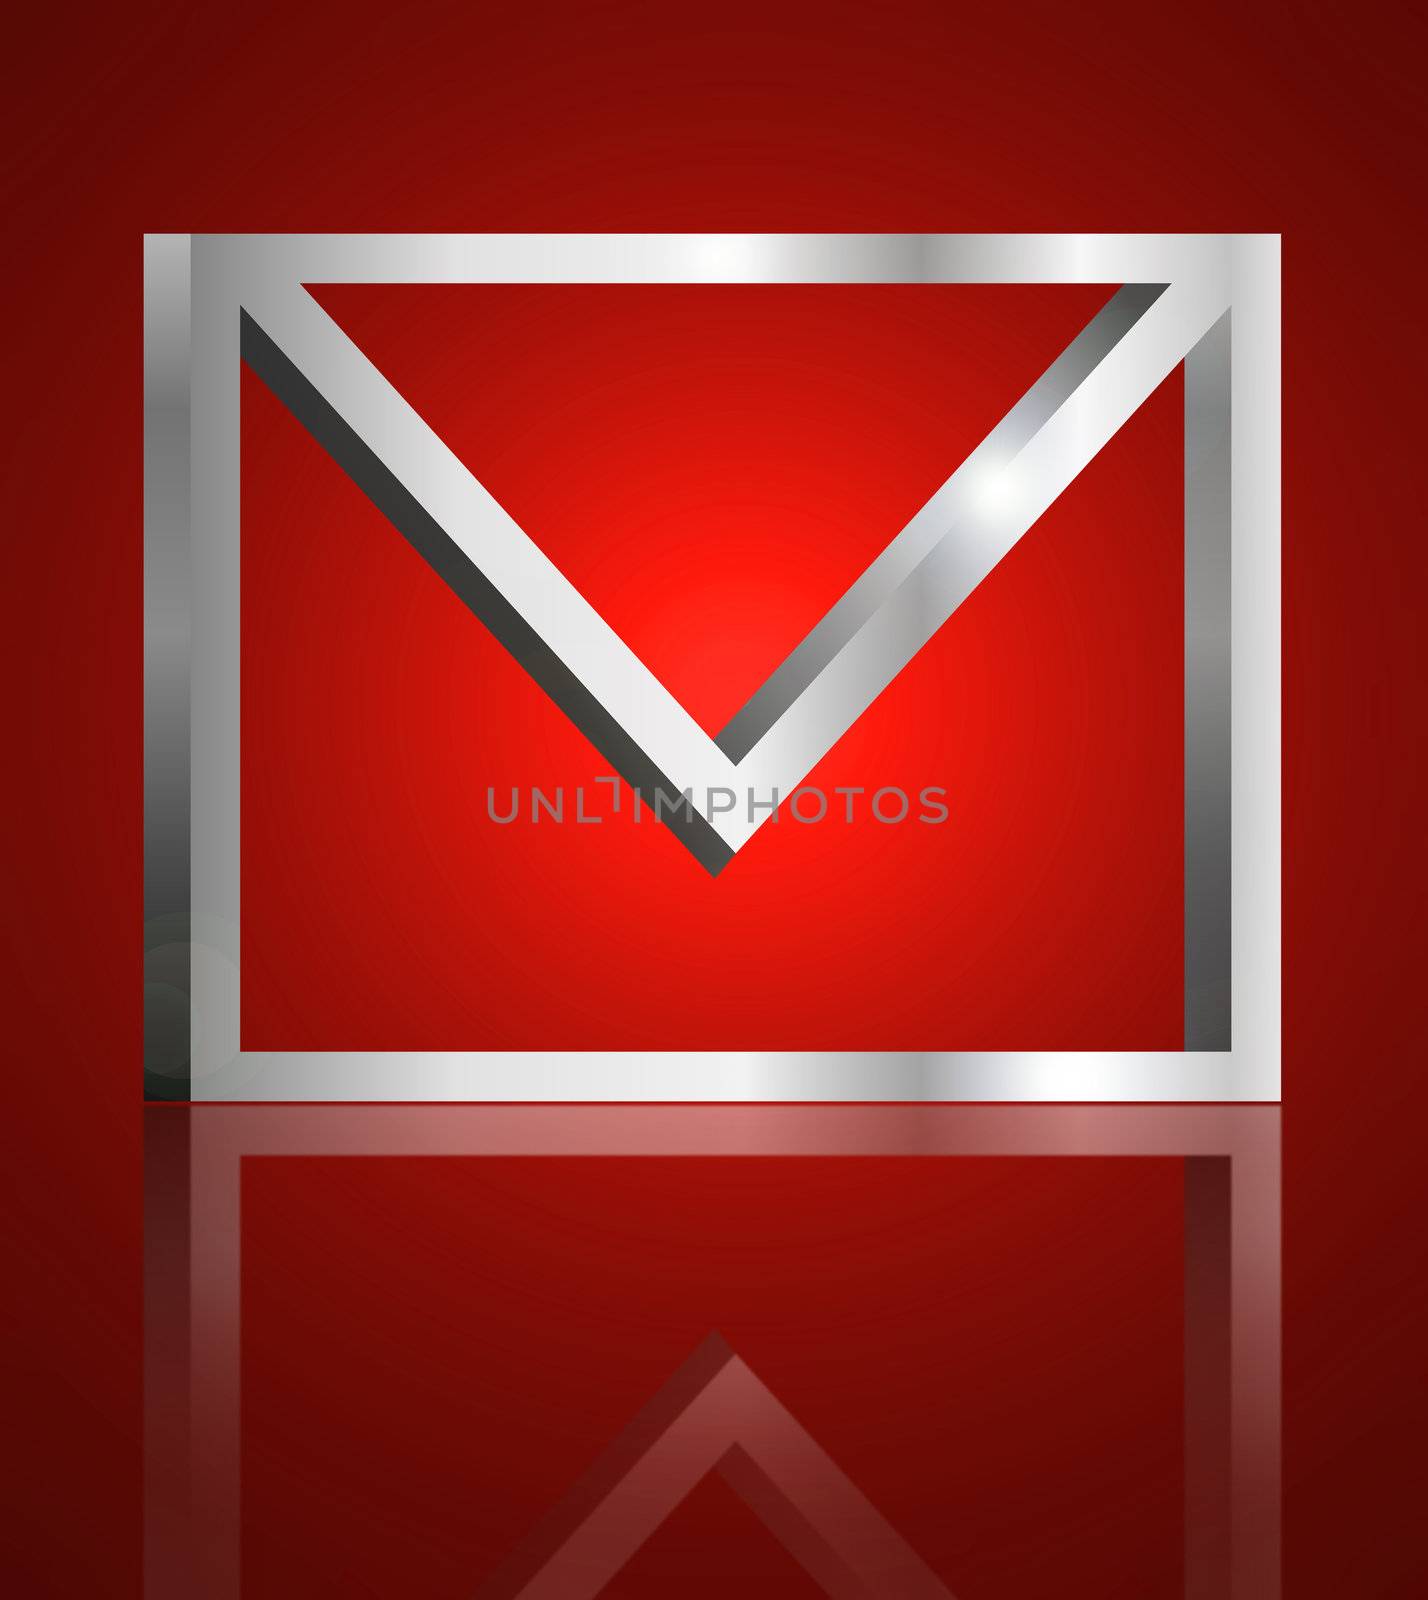 Illustration depicting a single metallic email symbol arranged over red and reflecting into foreground,.